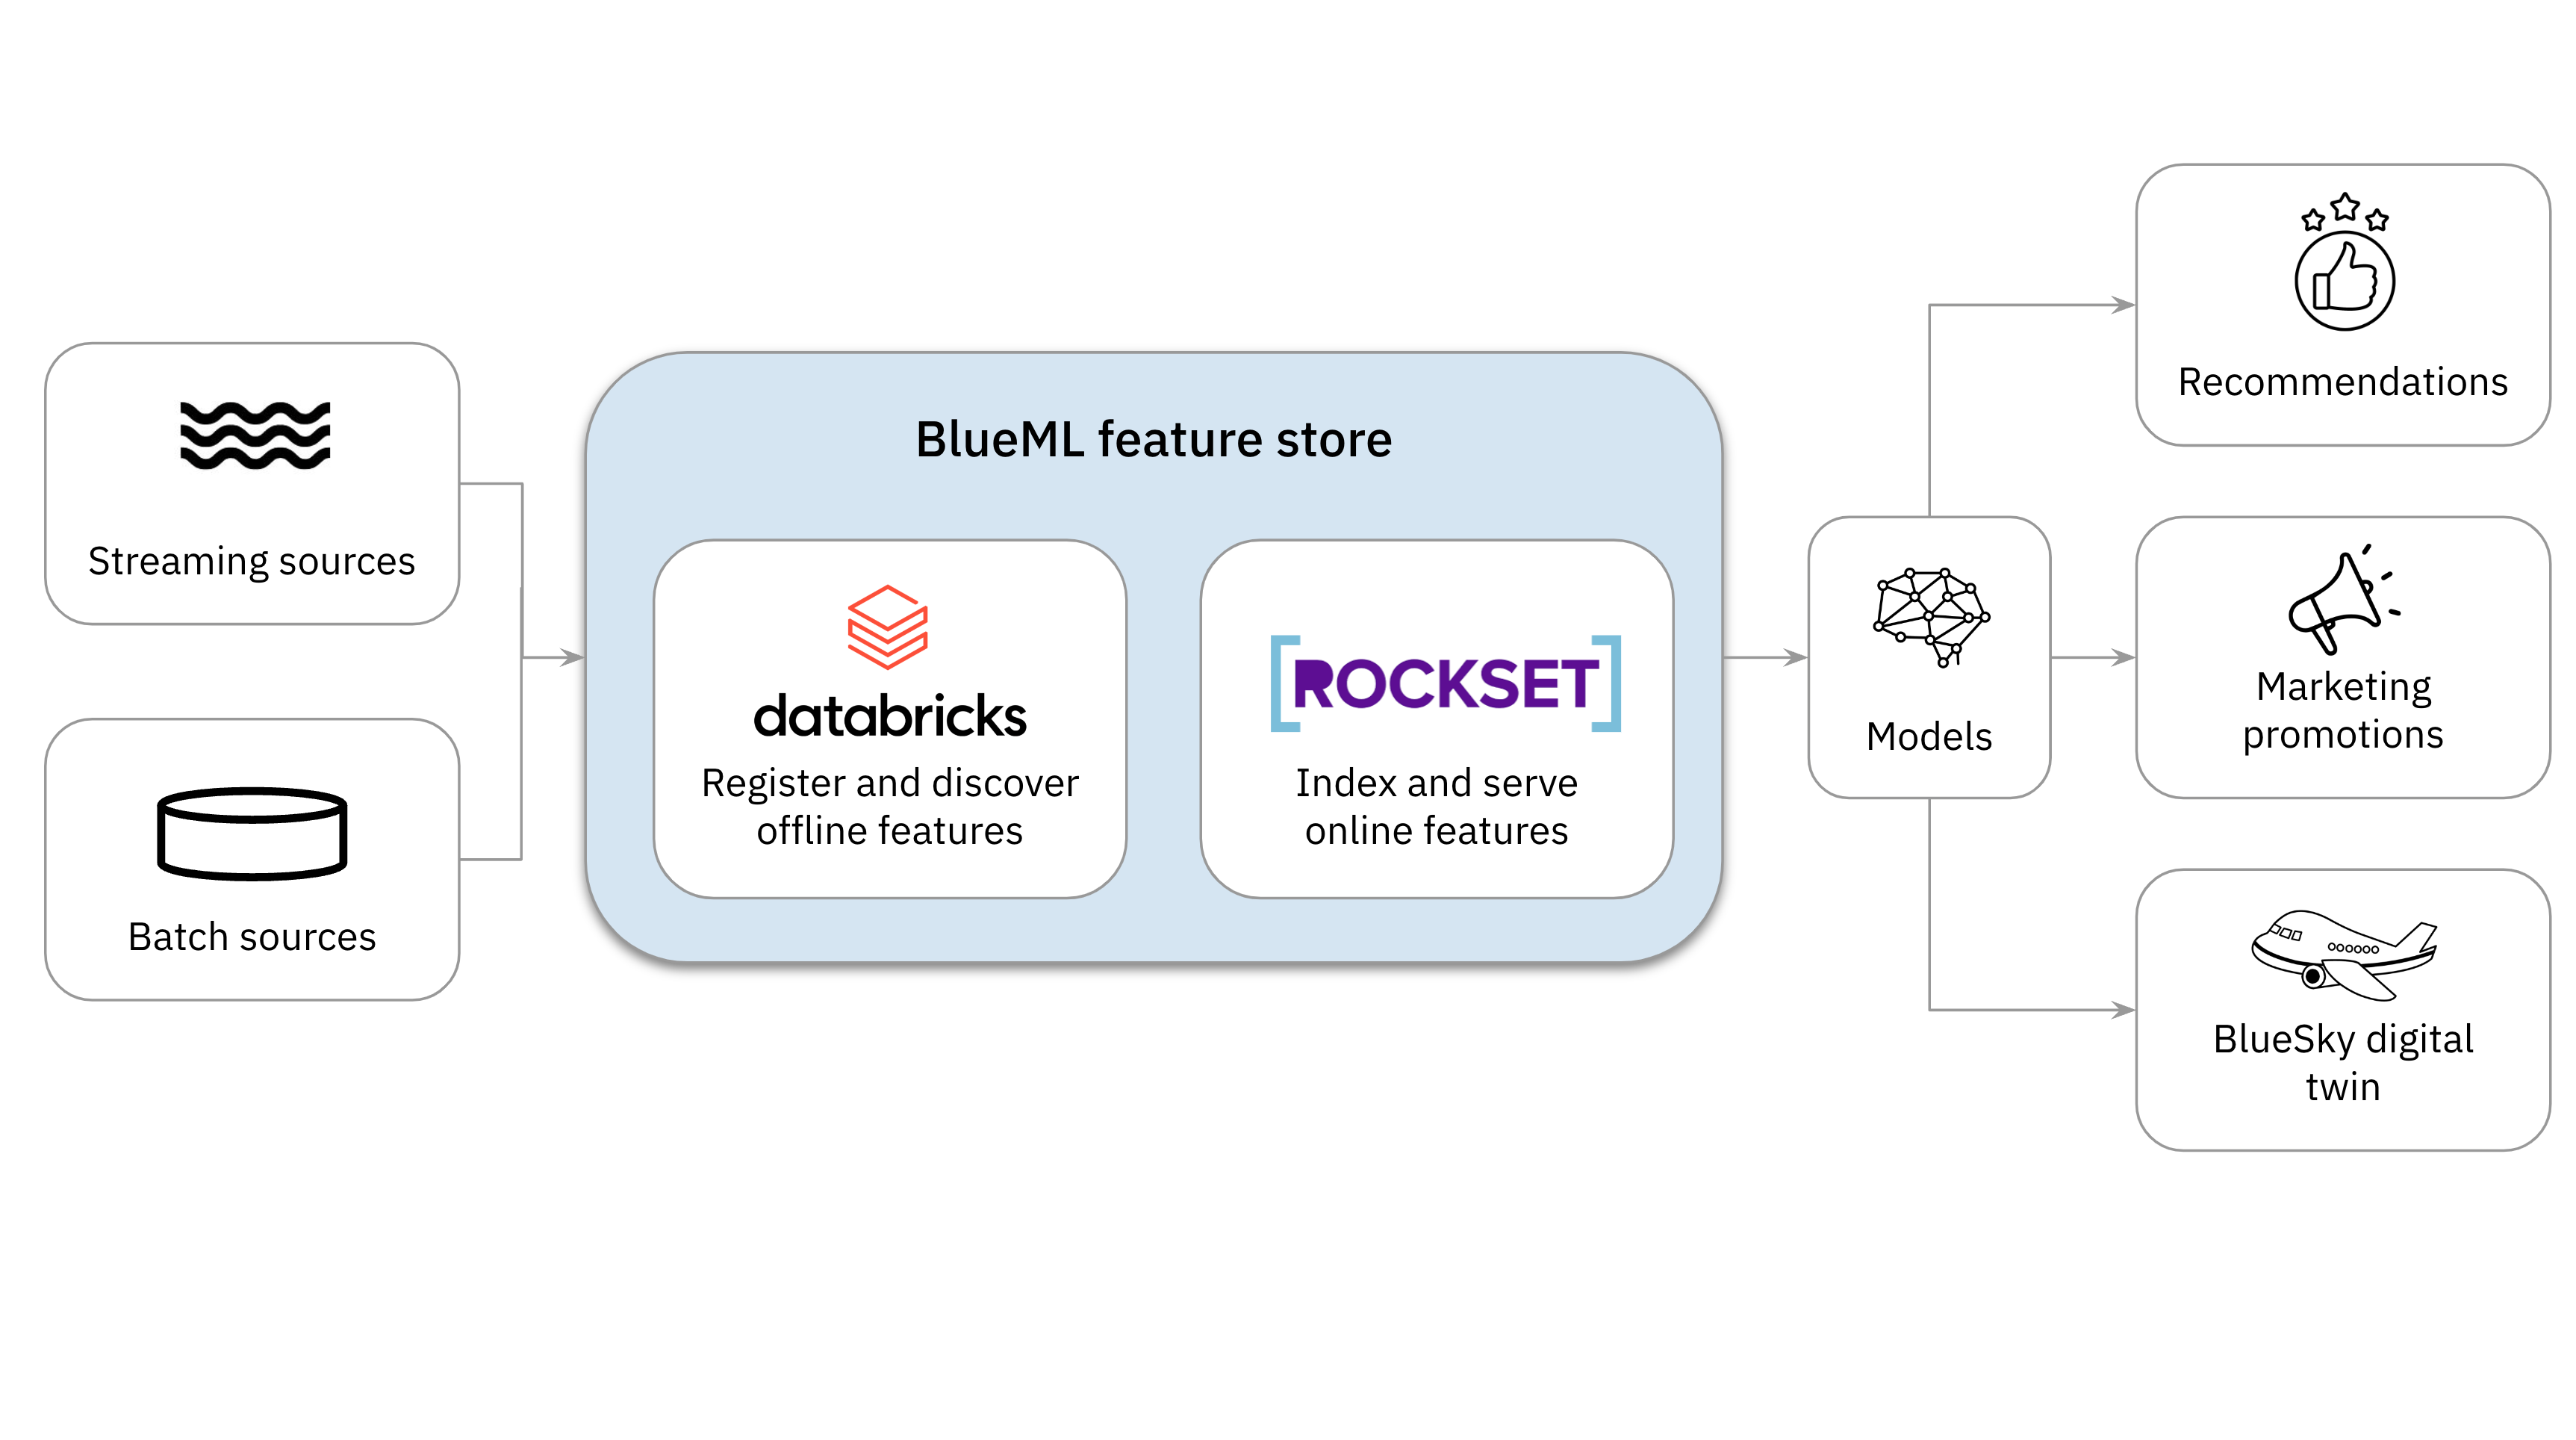 Rockset indexes and serves online features for recommendations, marketing promotions and the BlueSky digital twin.